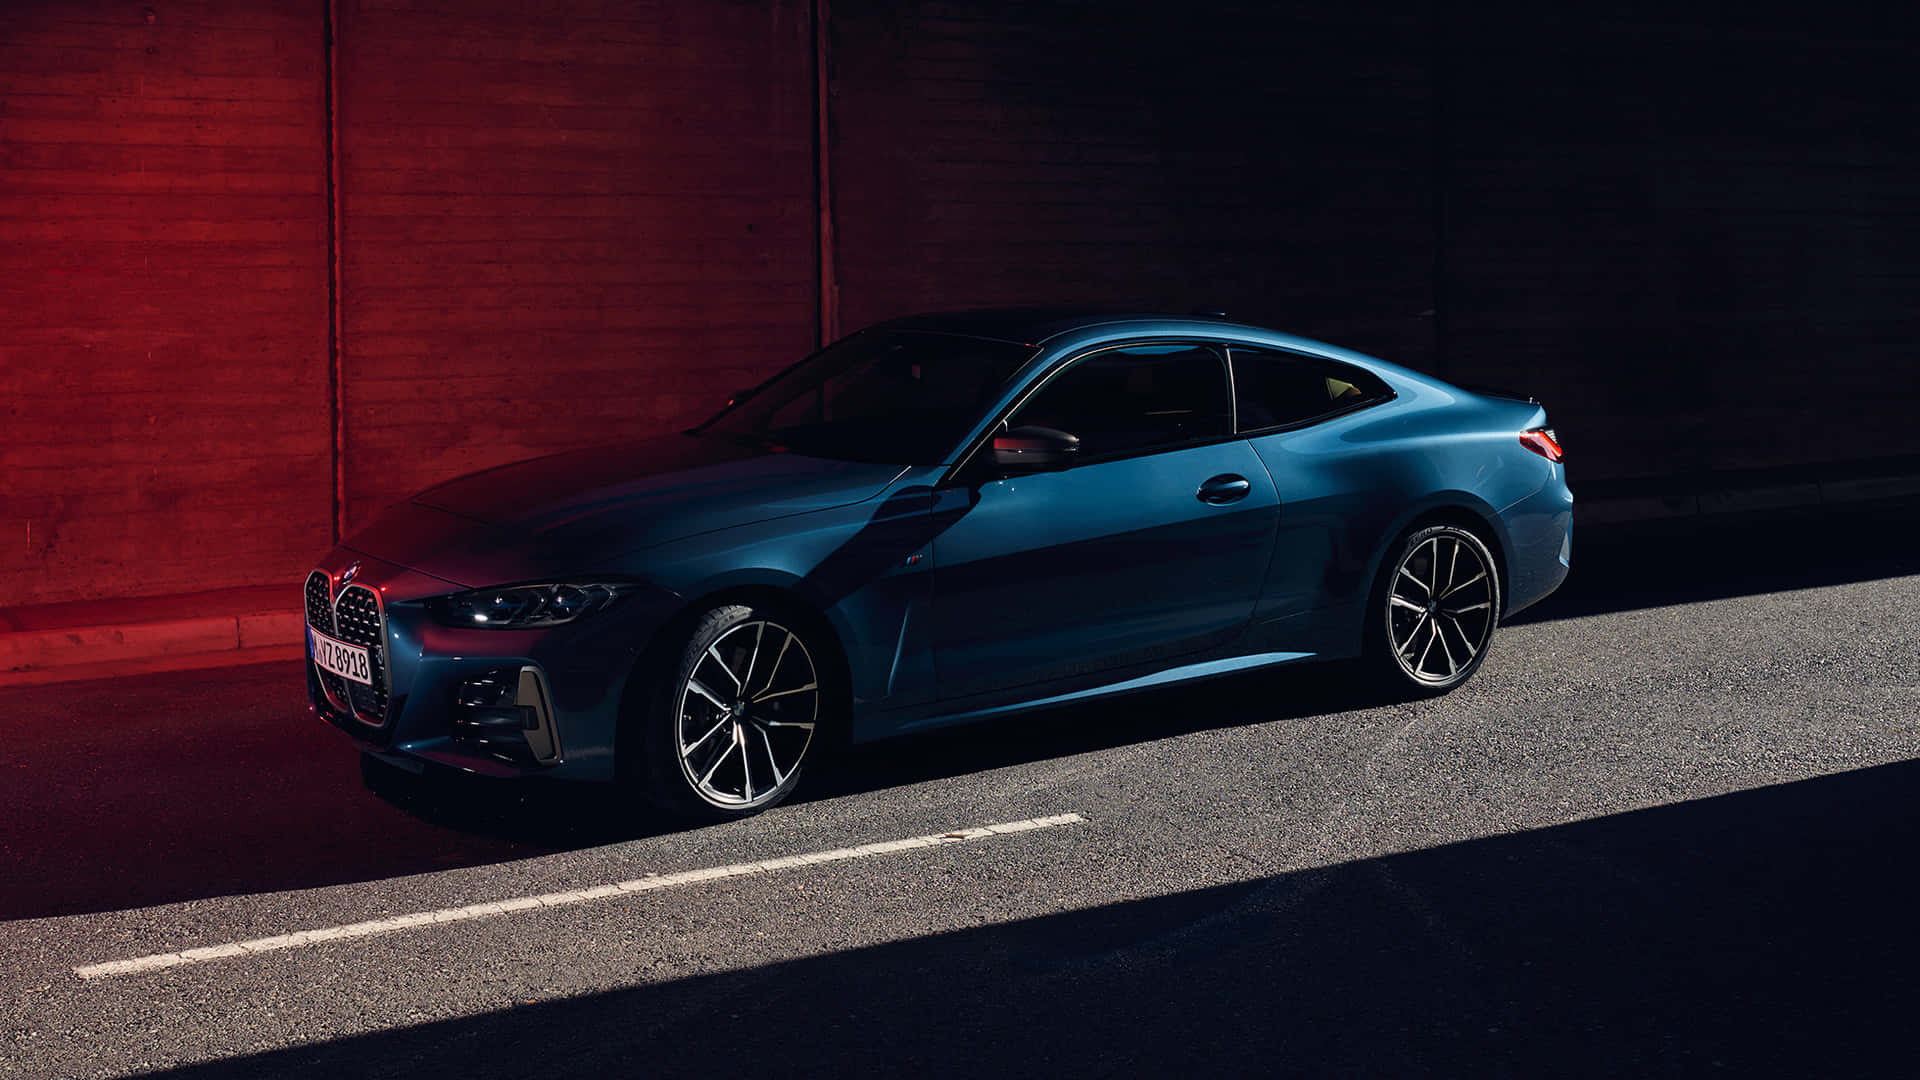 BMW 440i in a Shiny Glowing Blue Wallpaper